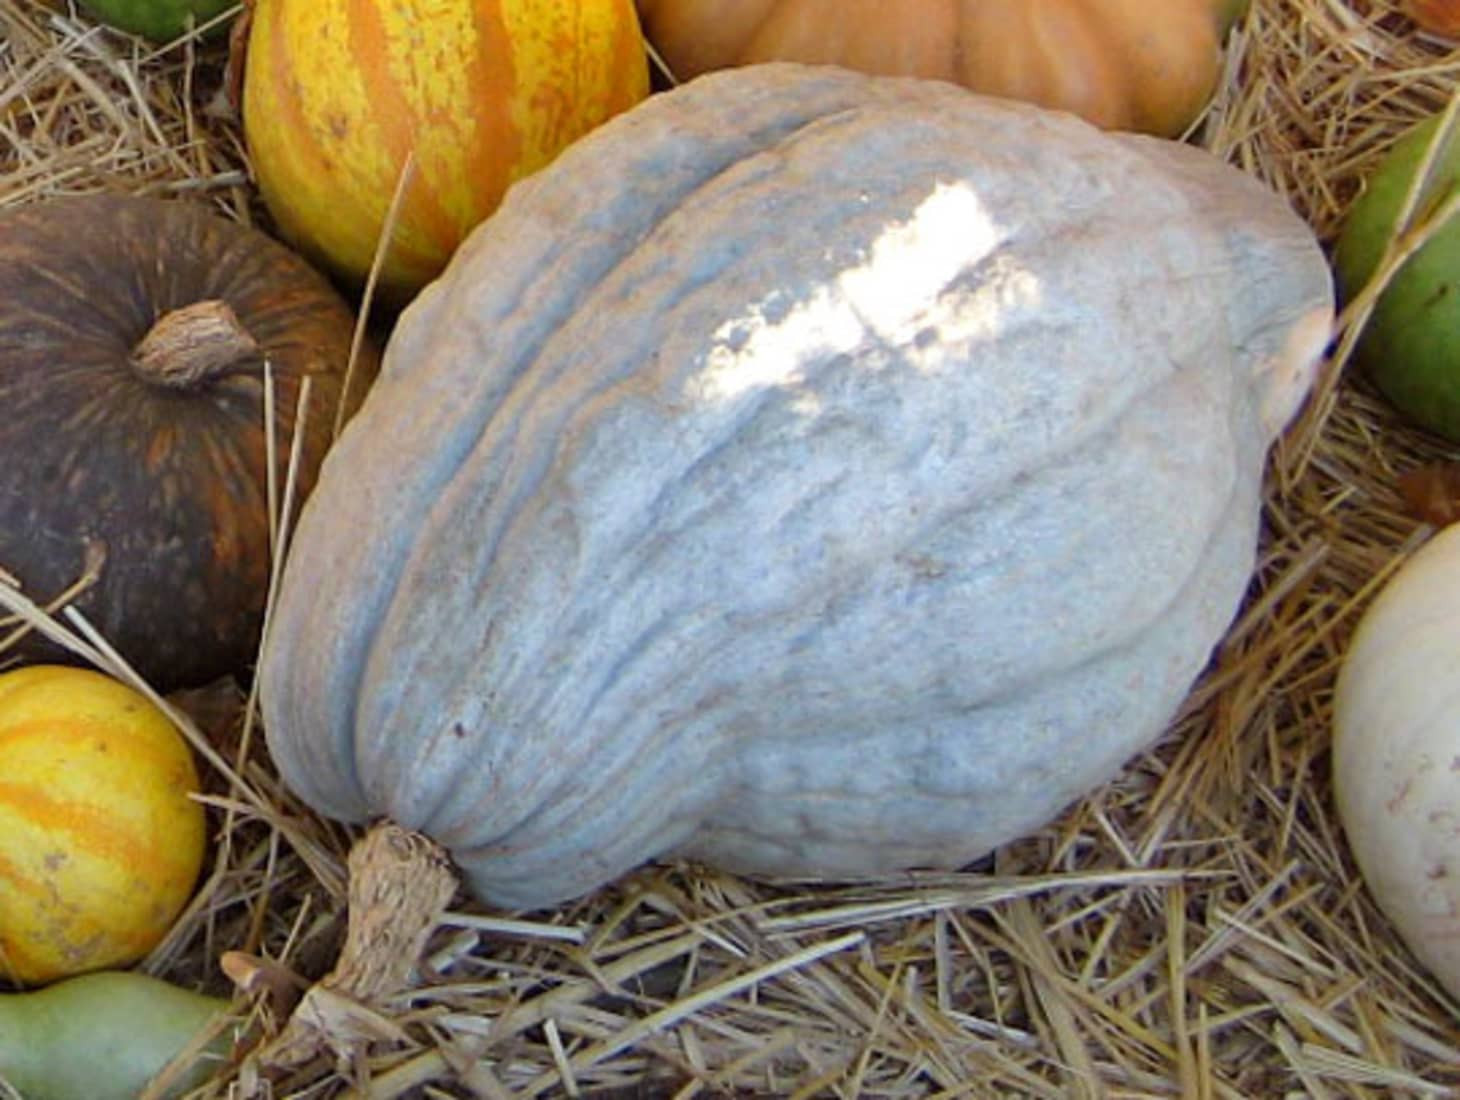 Winter Squash Varieties
 The 11 Varieties of Winter Squash You Need to Know